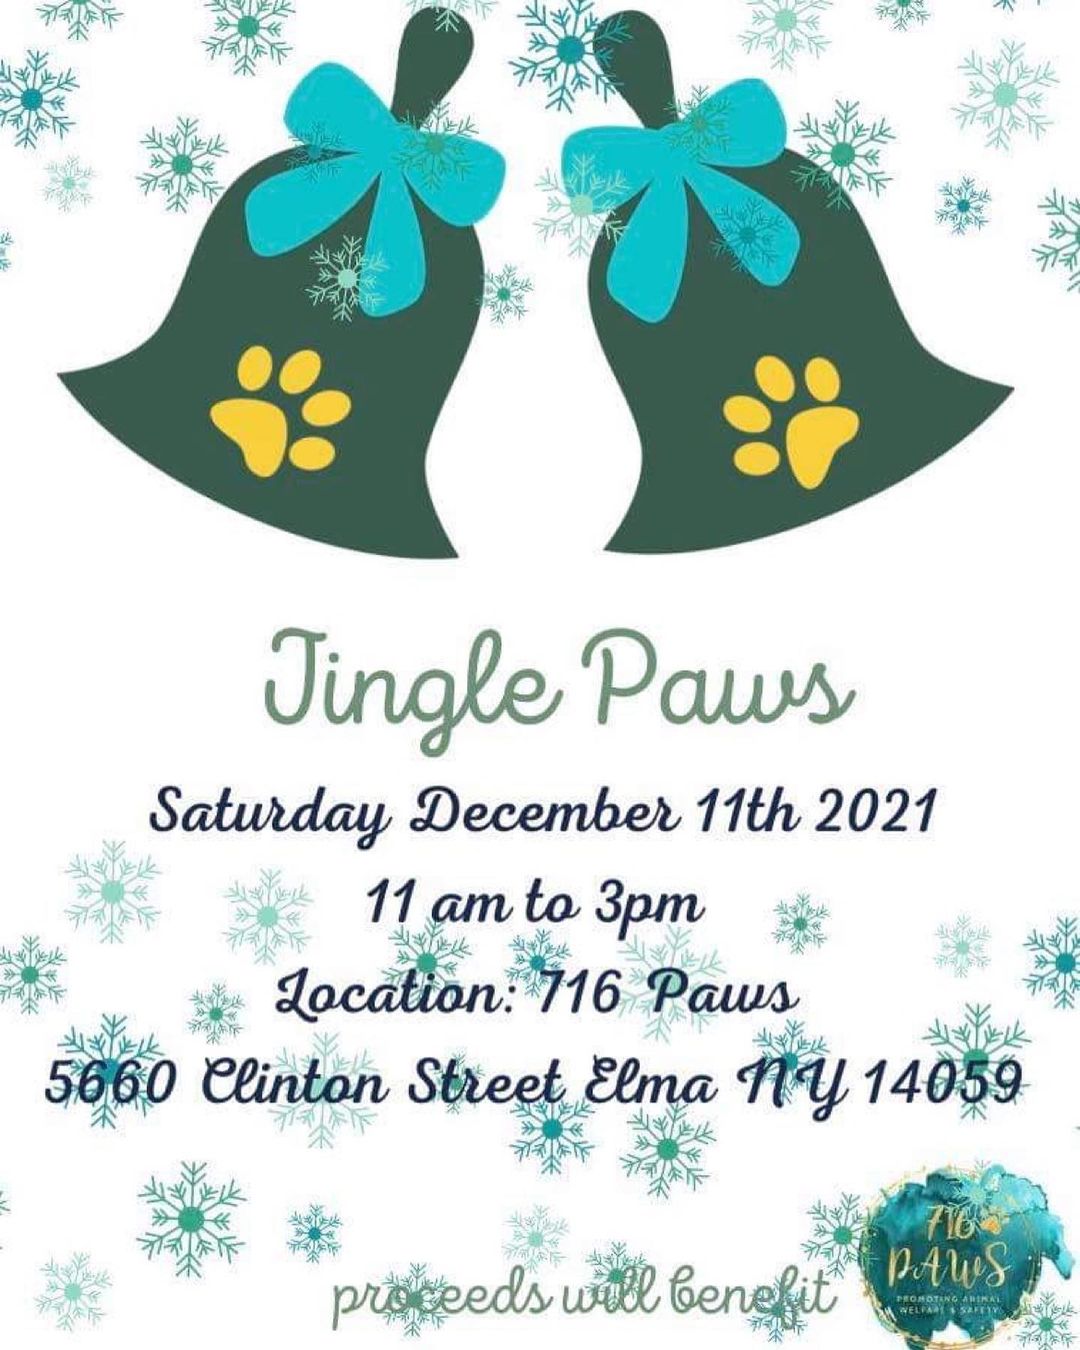 🔔 Save the date!! You won’t want to miss this! 

📸 Bring your kids or your dog friendly pooch to get their holiday photos done! 

🎨Crafts on site to make ornaments with your kids or a painting created by your dog! 

⭐️ Browse some vendors - compete list to follow in the next few days. 

🍷 Wine pull - perfect gift to give someone at the holidays